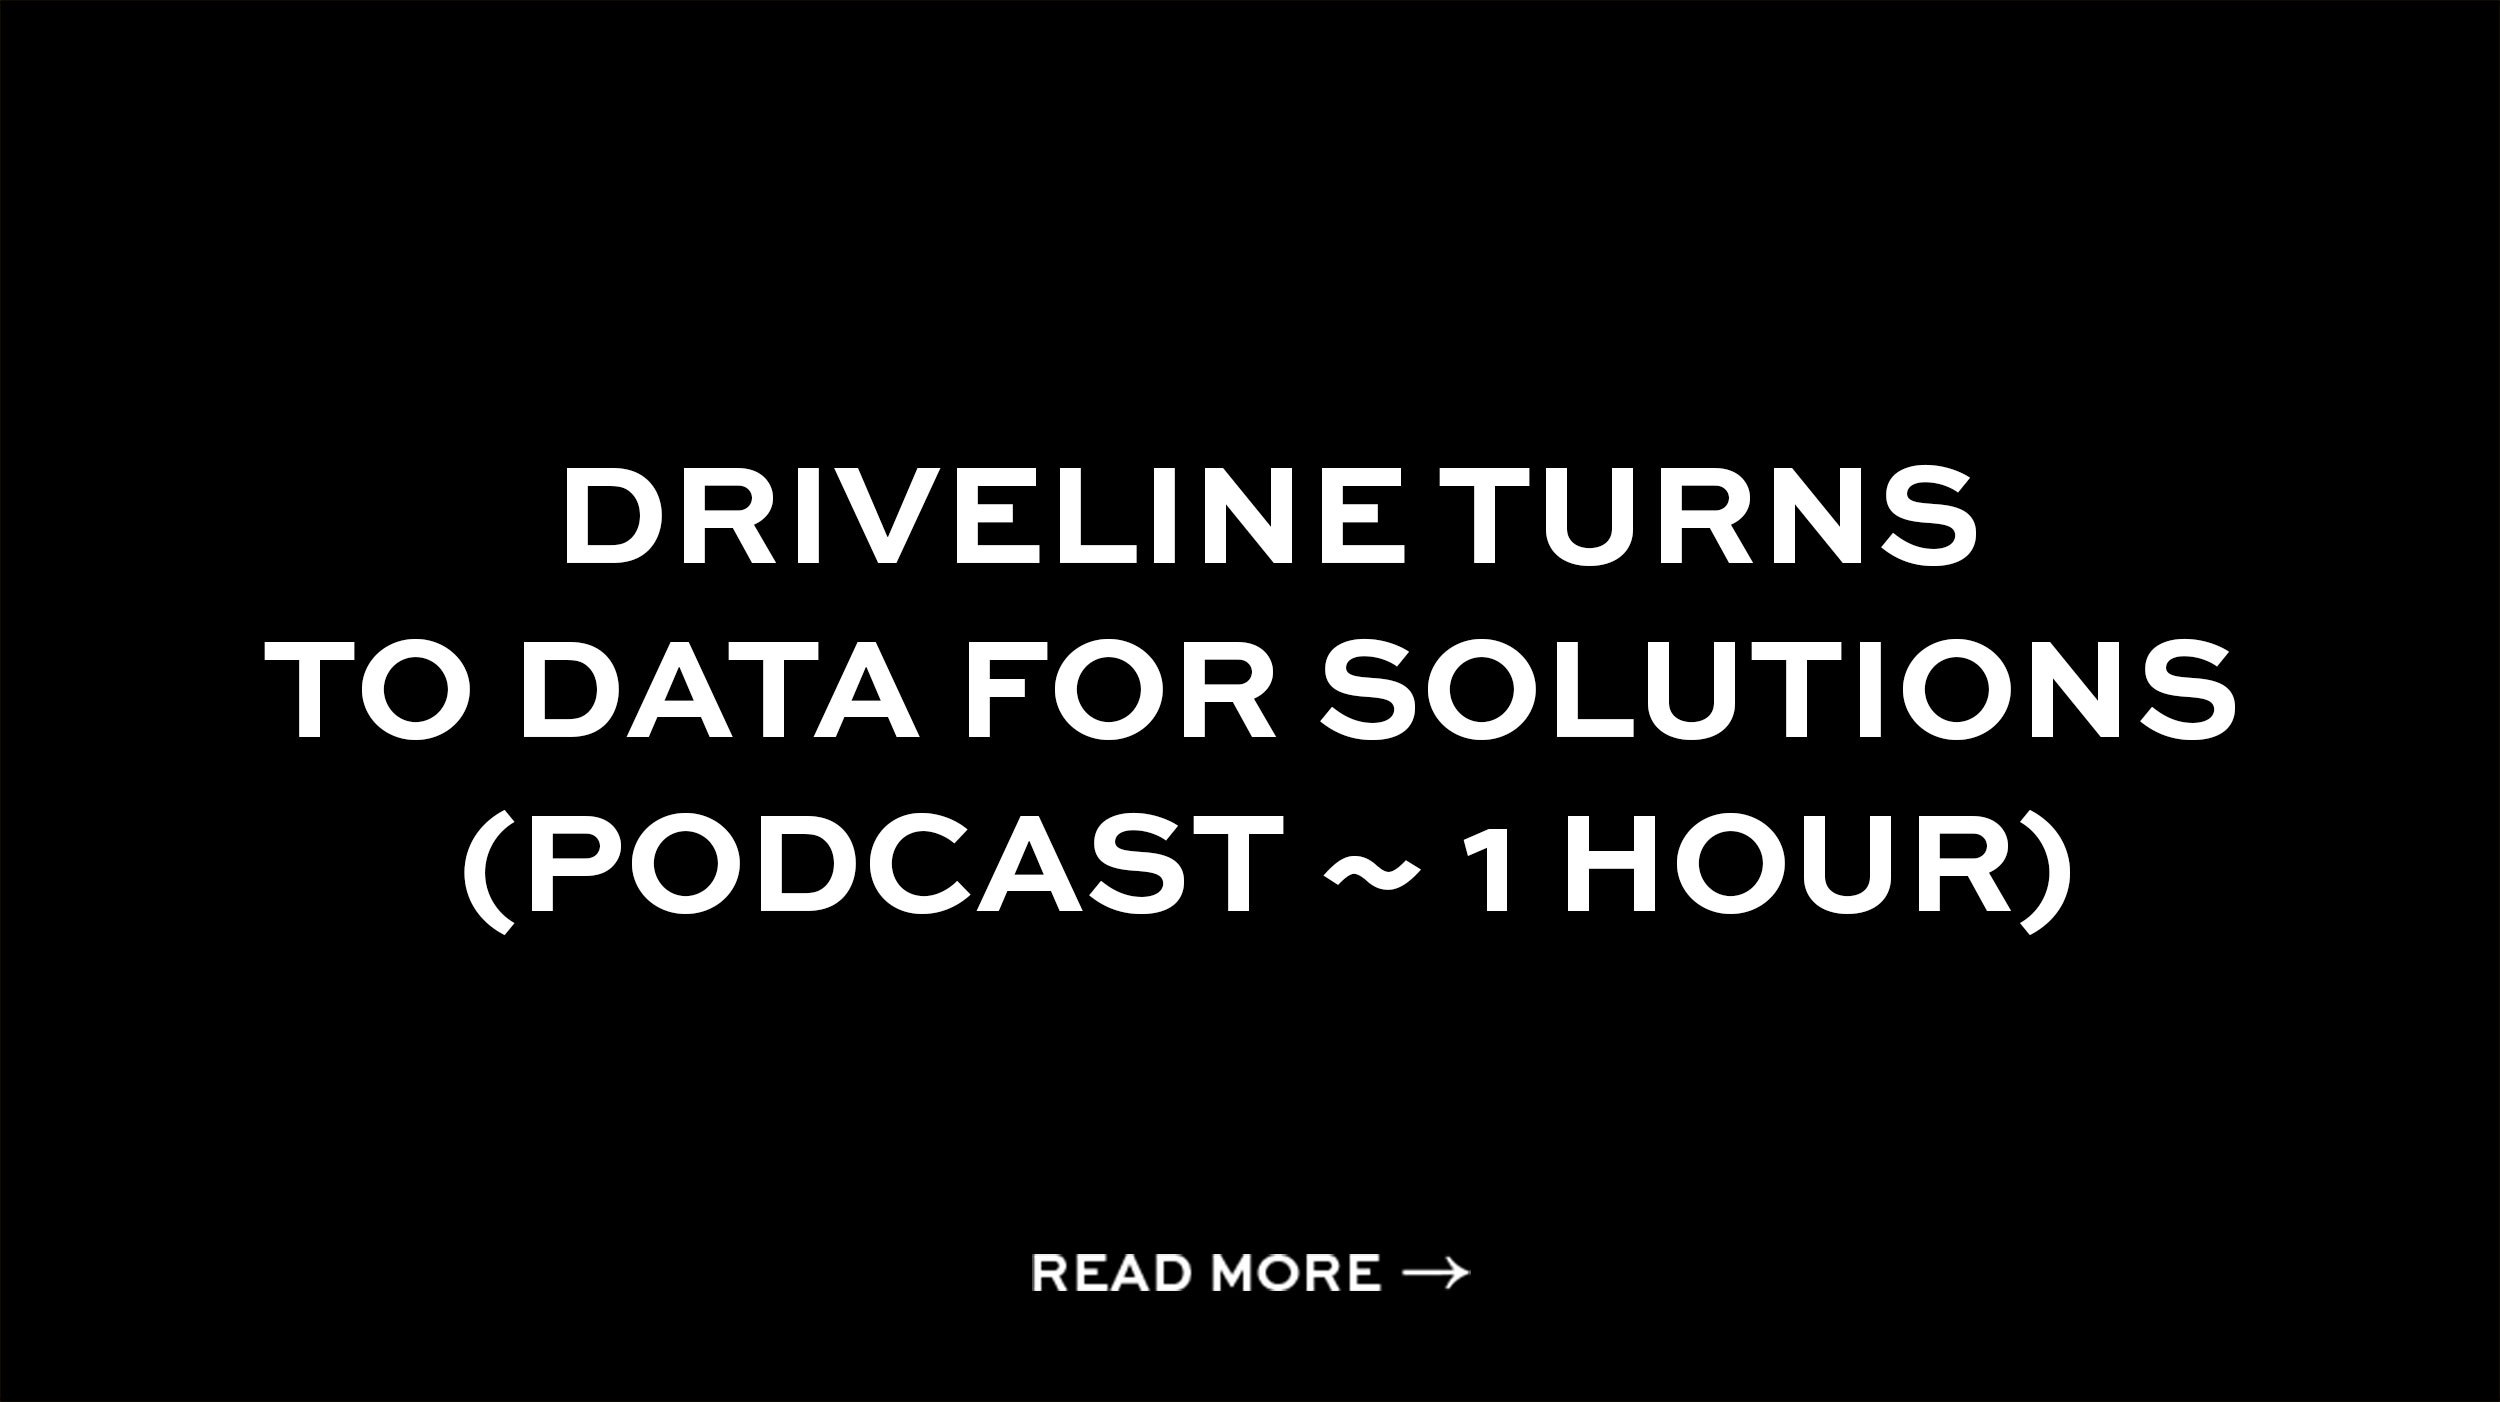 Driveline Turns to Data for Solutions (Podcast ~ 1 hour)